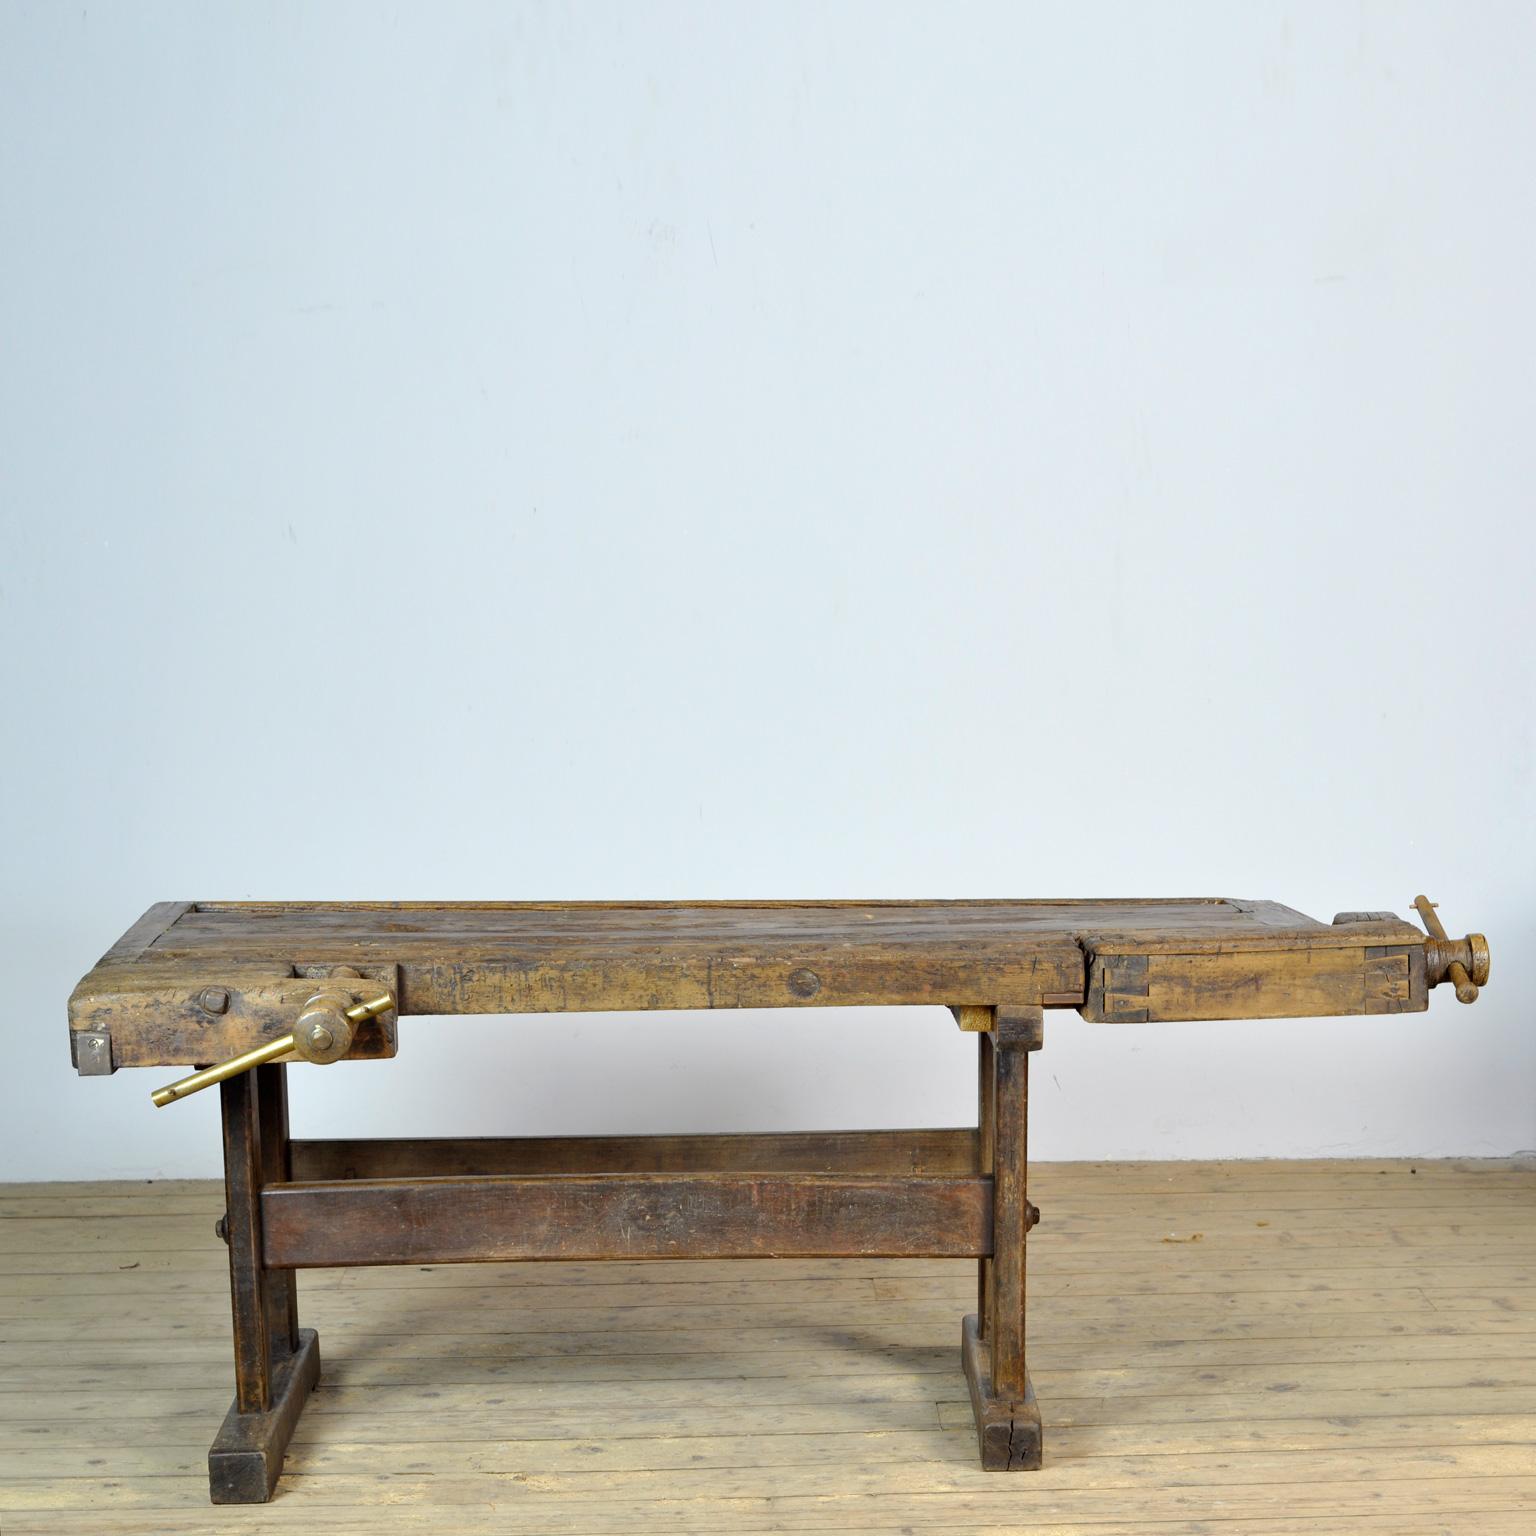 This antique workbench has two built-in wooden vices screws and a recessed tray where the carpenter would put his tools. It was manufactured around 1910. Made from oak. Beautiful patina after years of use. The workbench has been treated for